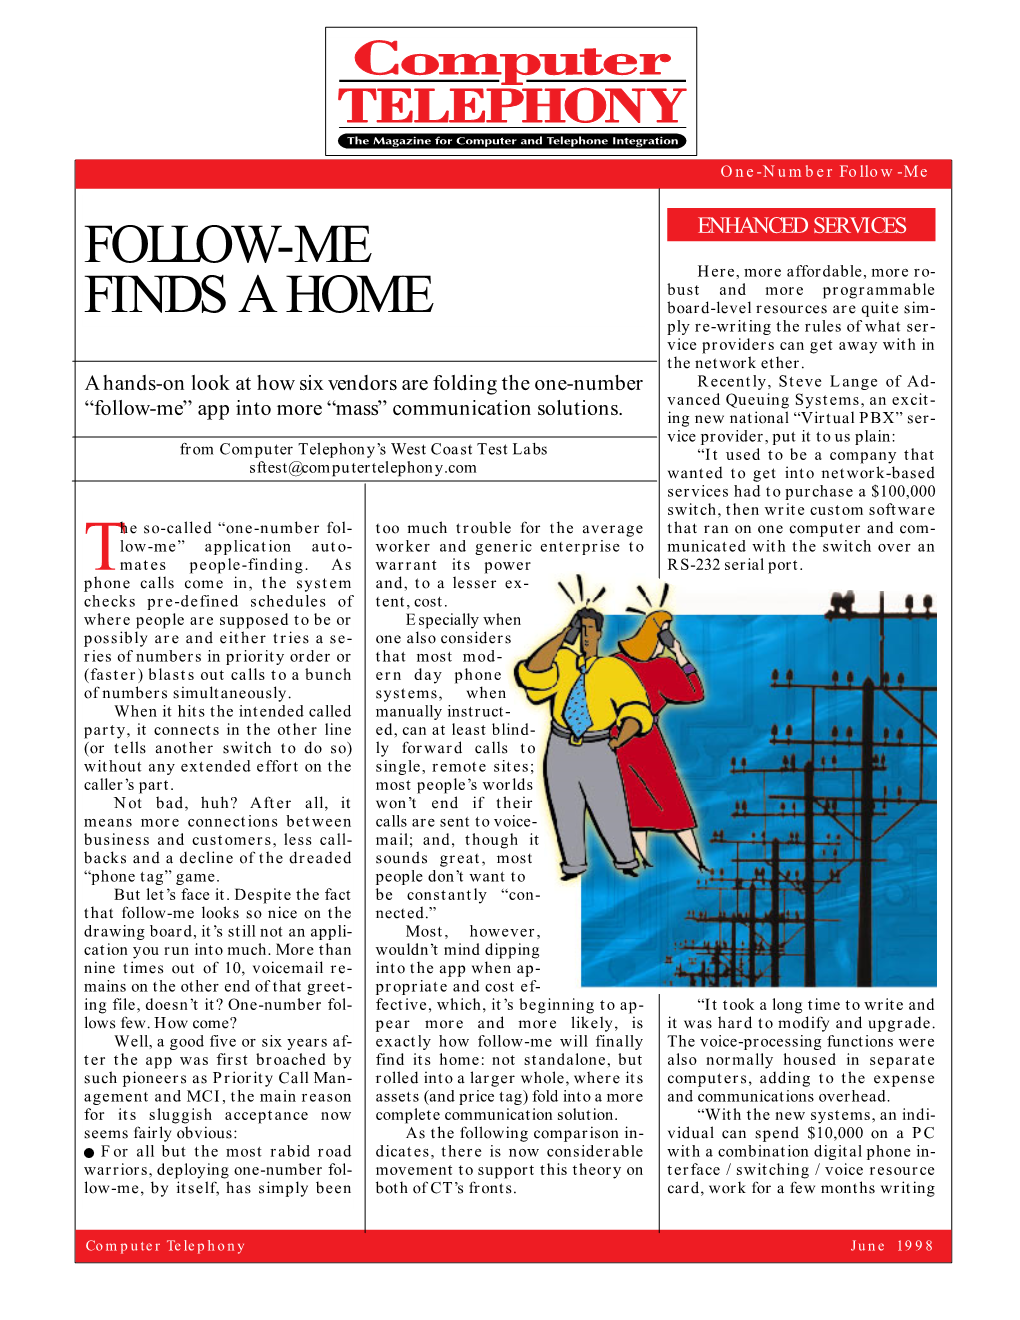 Follow-Me Finds a Home